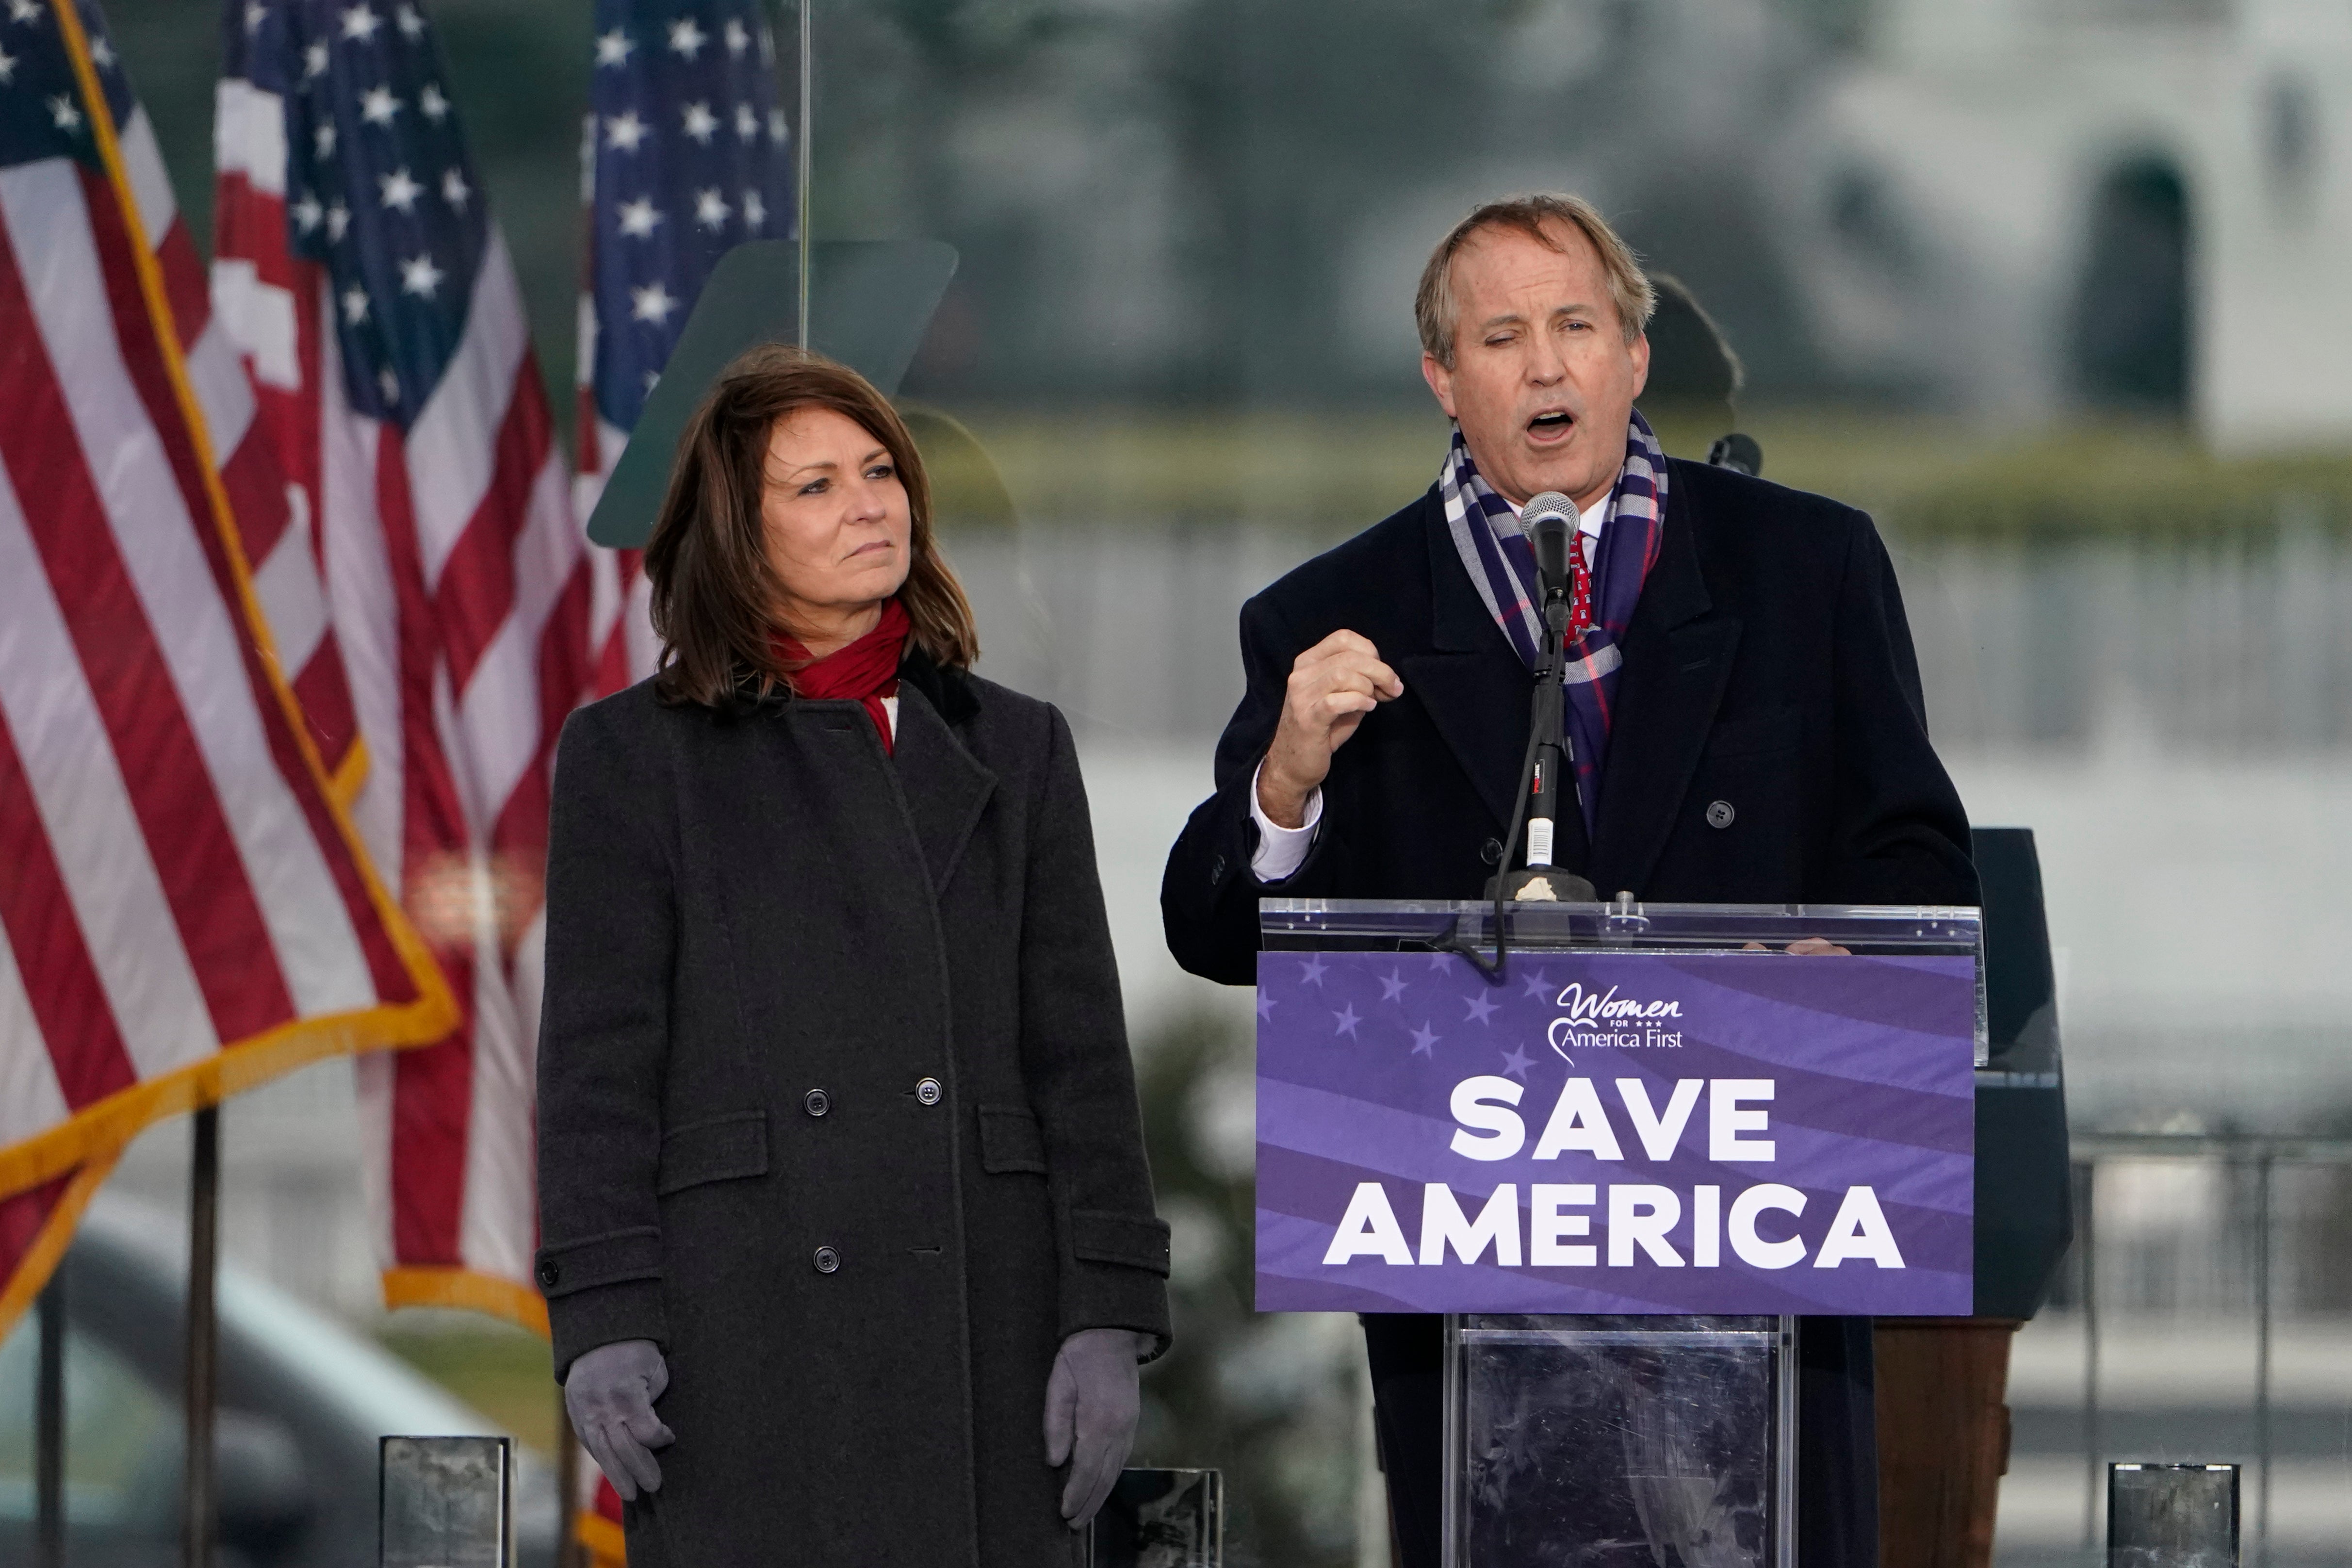 Texas Attorney General Ken Paxton speaks at a rally in support of President Donald Trump on 6 January